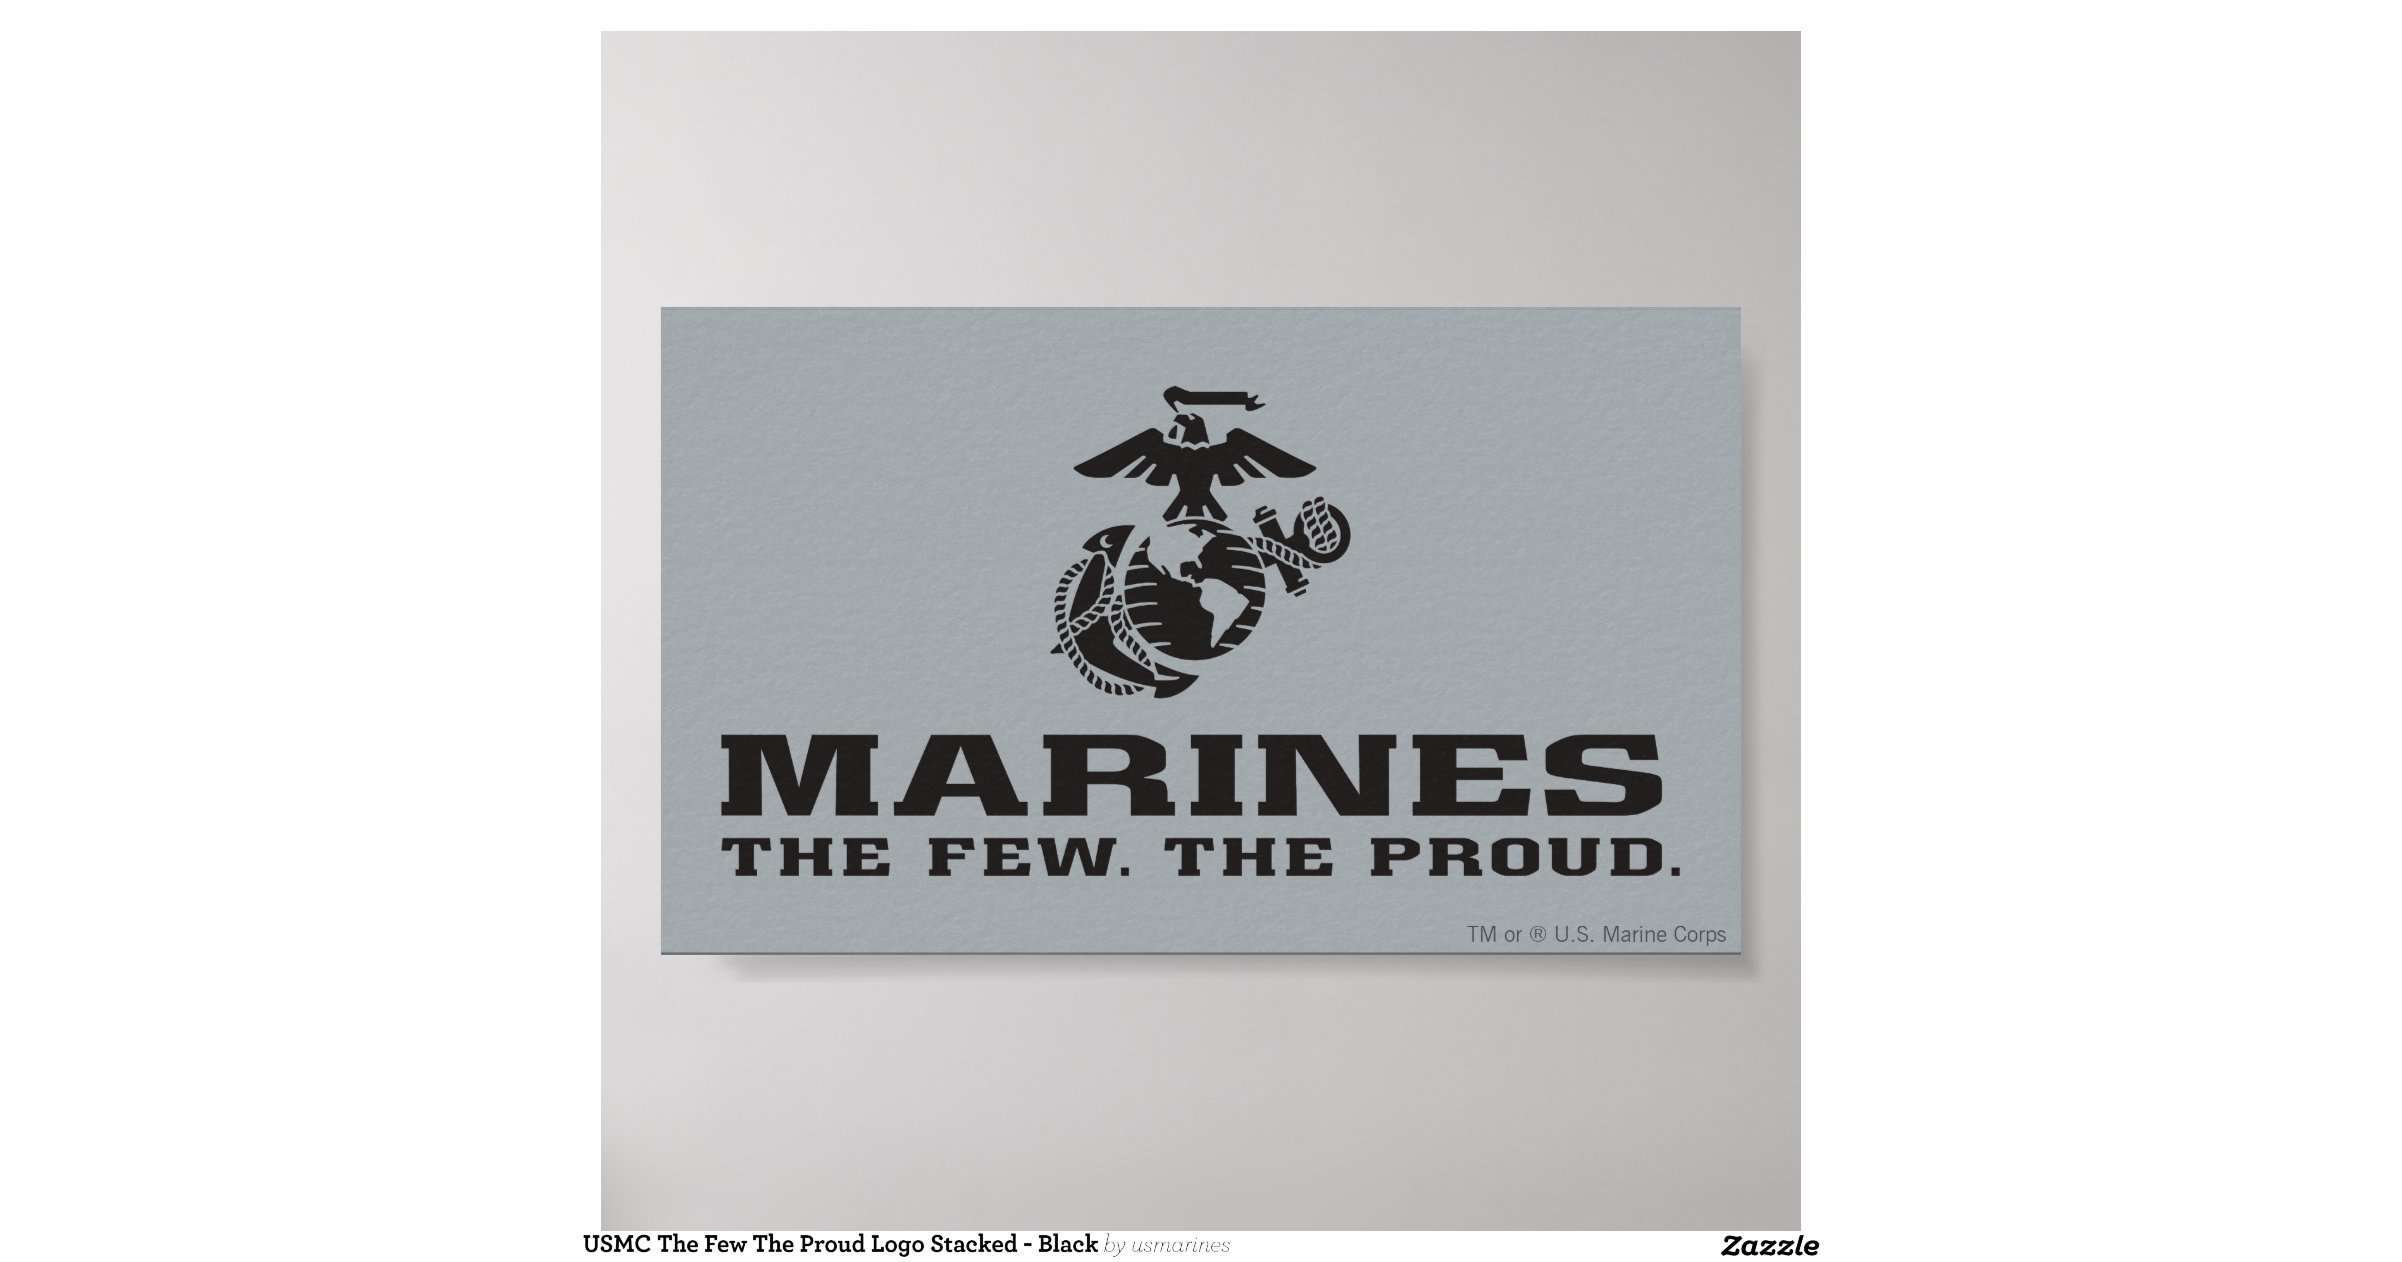 usmc_the_few_the_proud_logo_stacked_black_poster ...